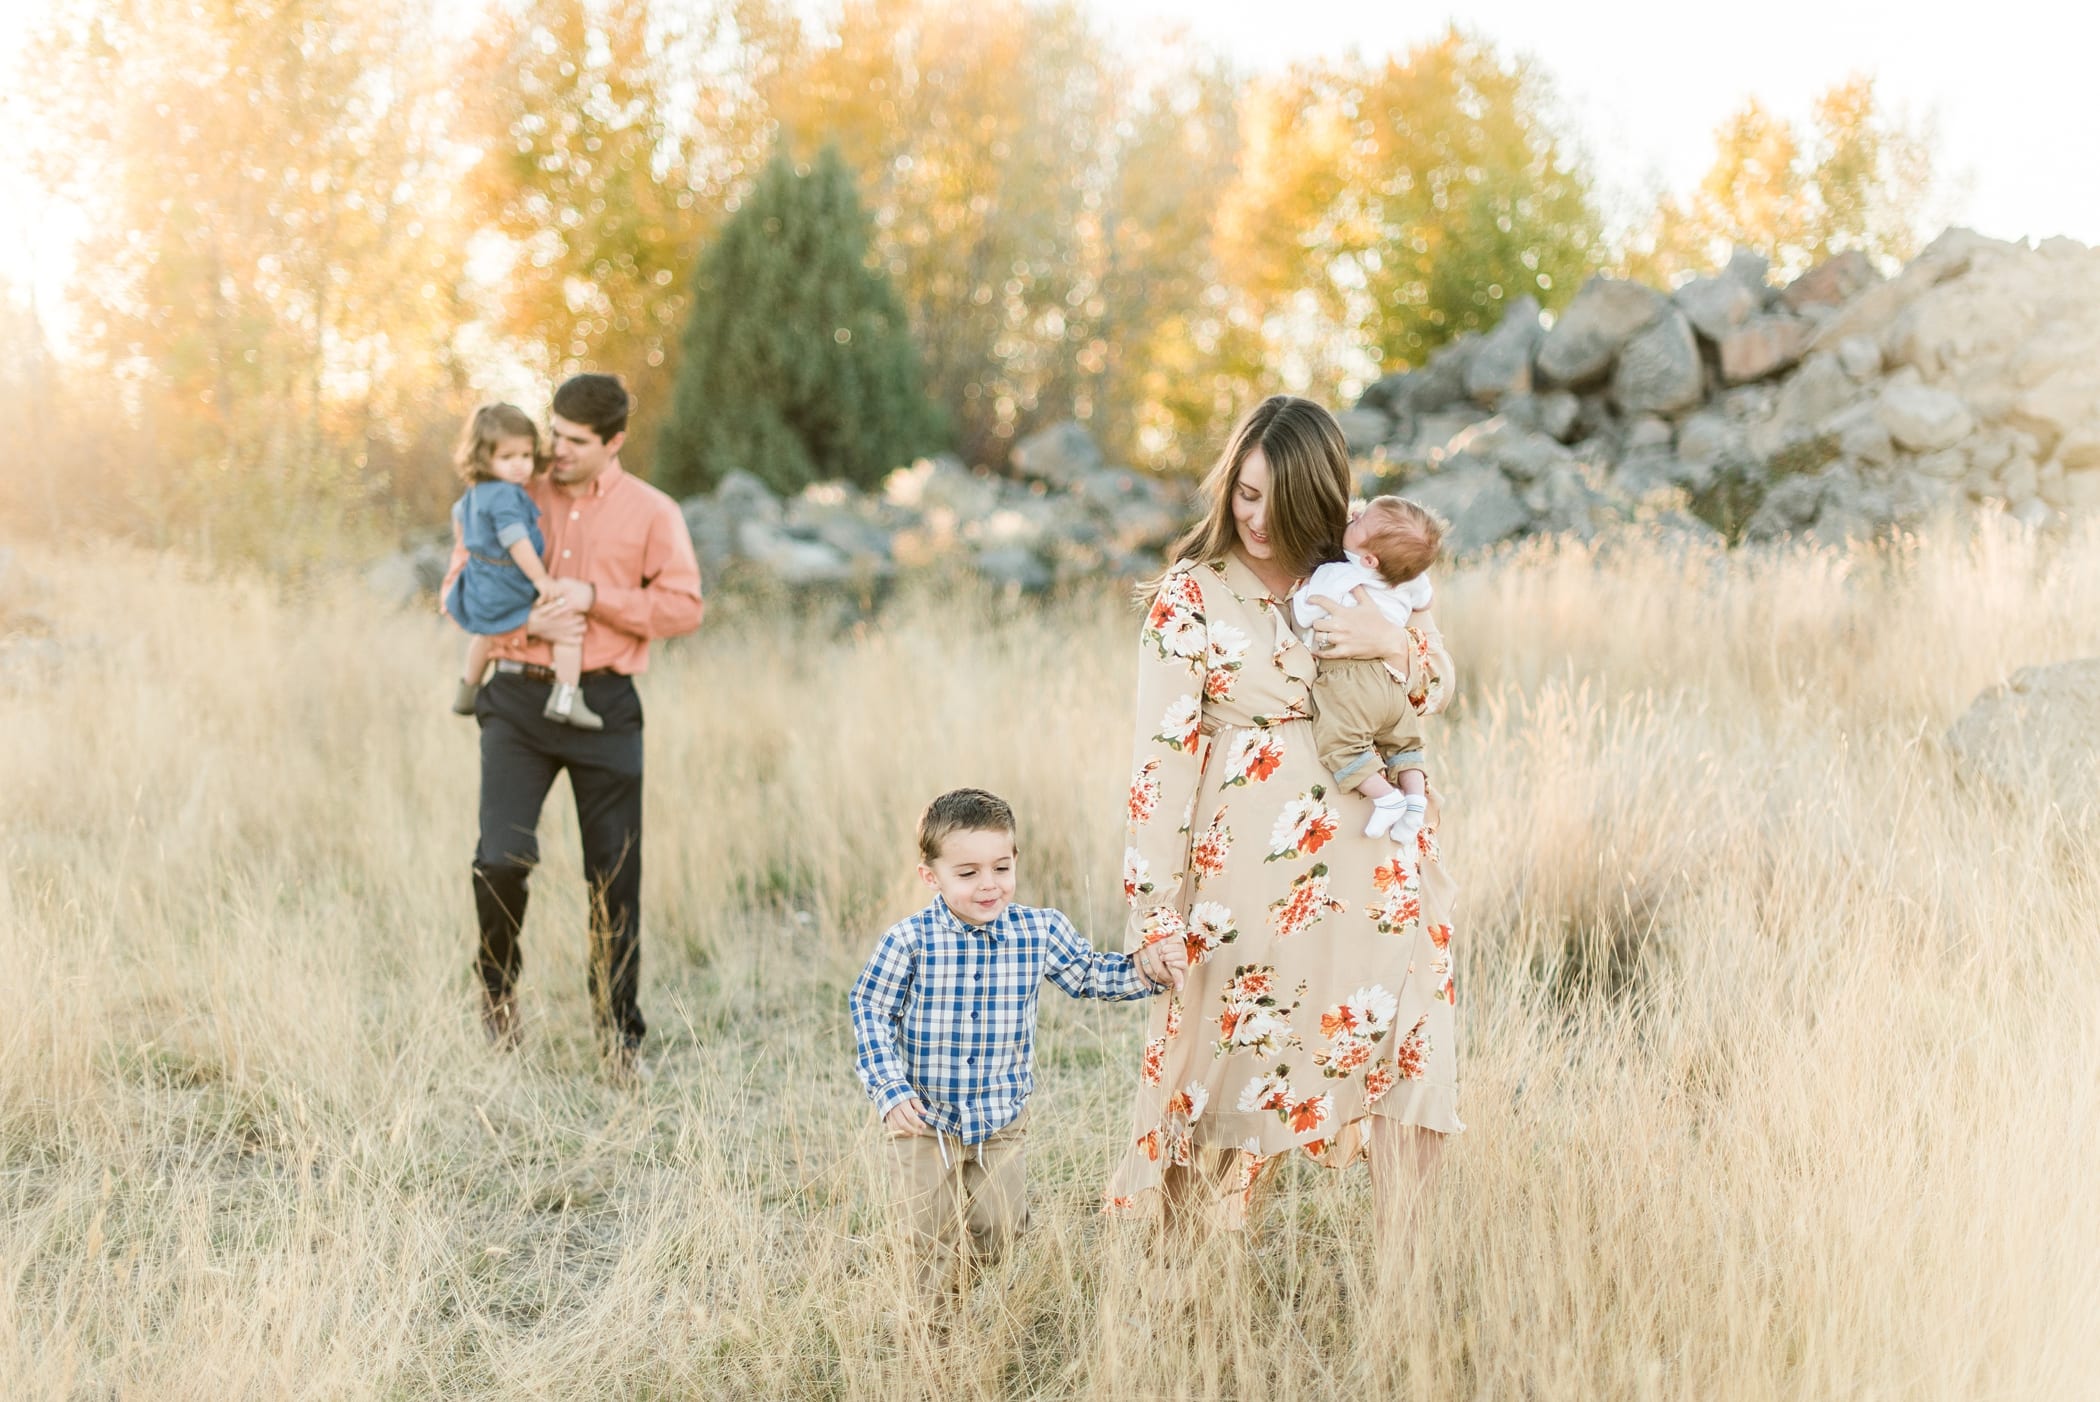 What to wear for family photos in the fall photo